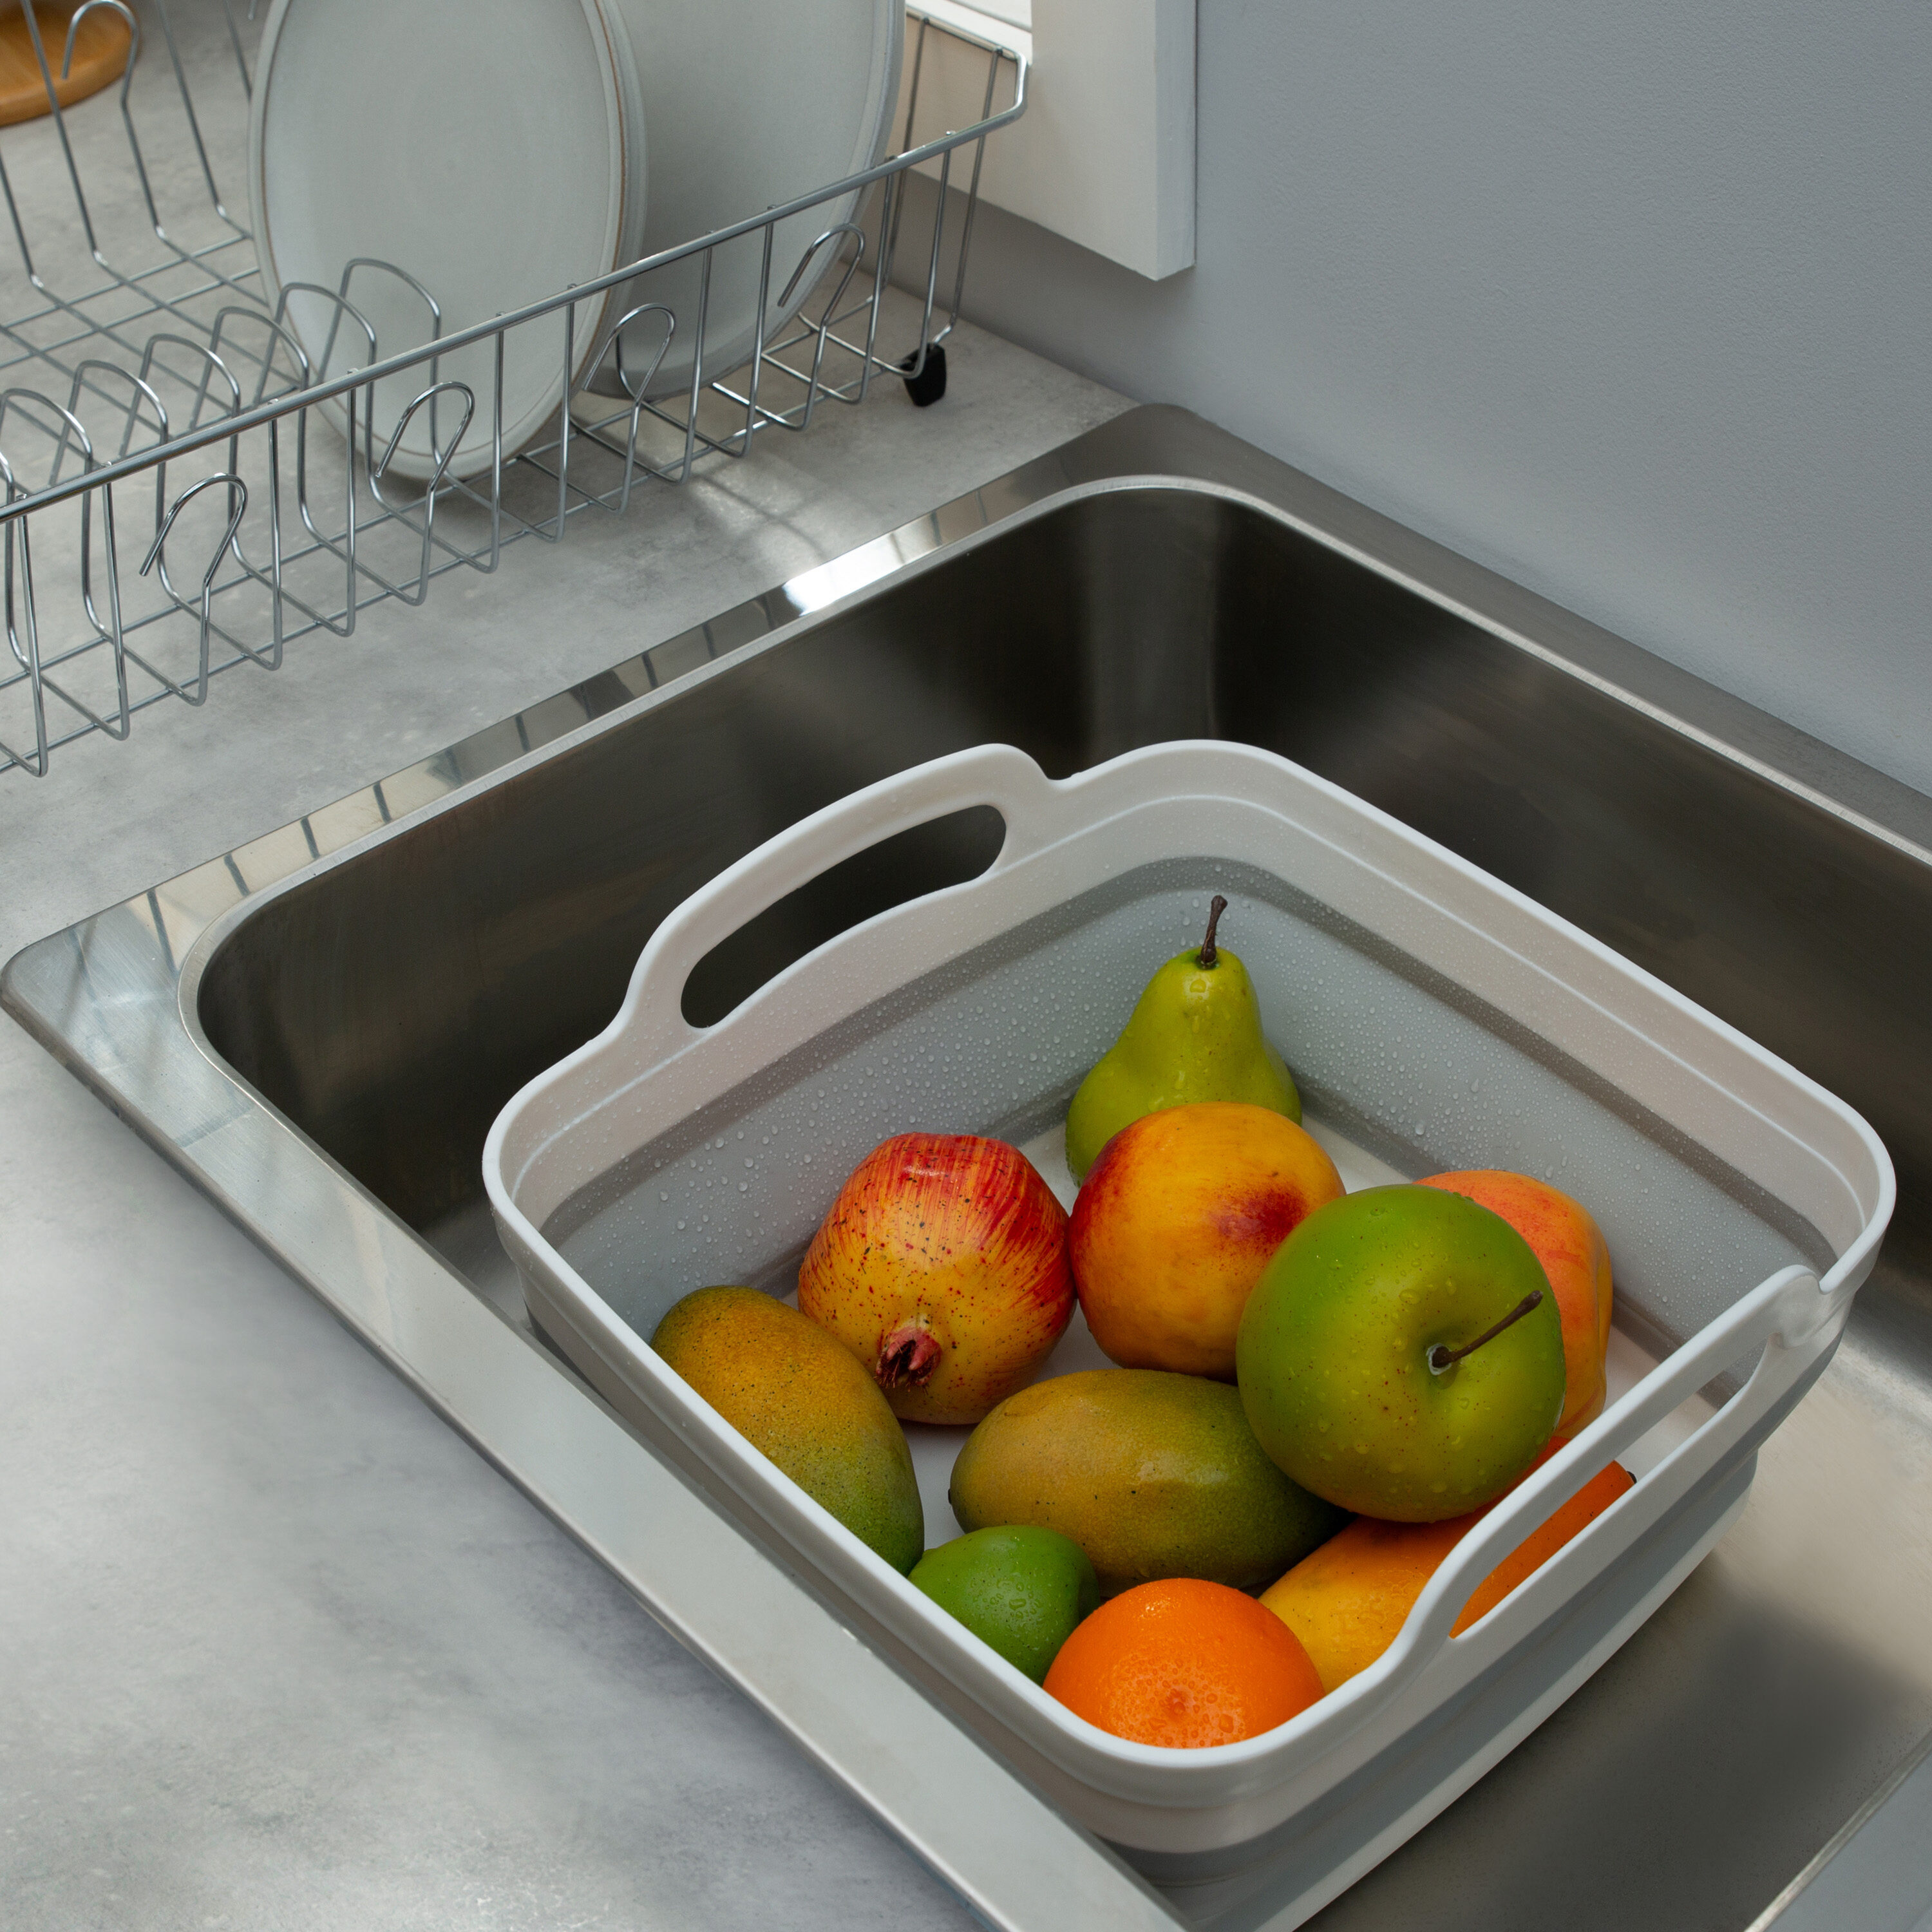 OXO Metal Freestanding Sink Caddy at